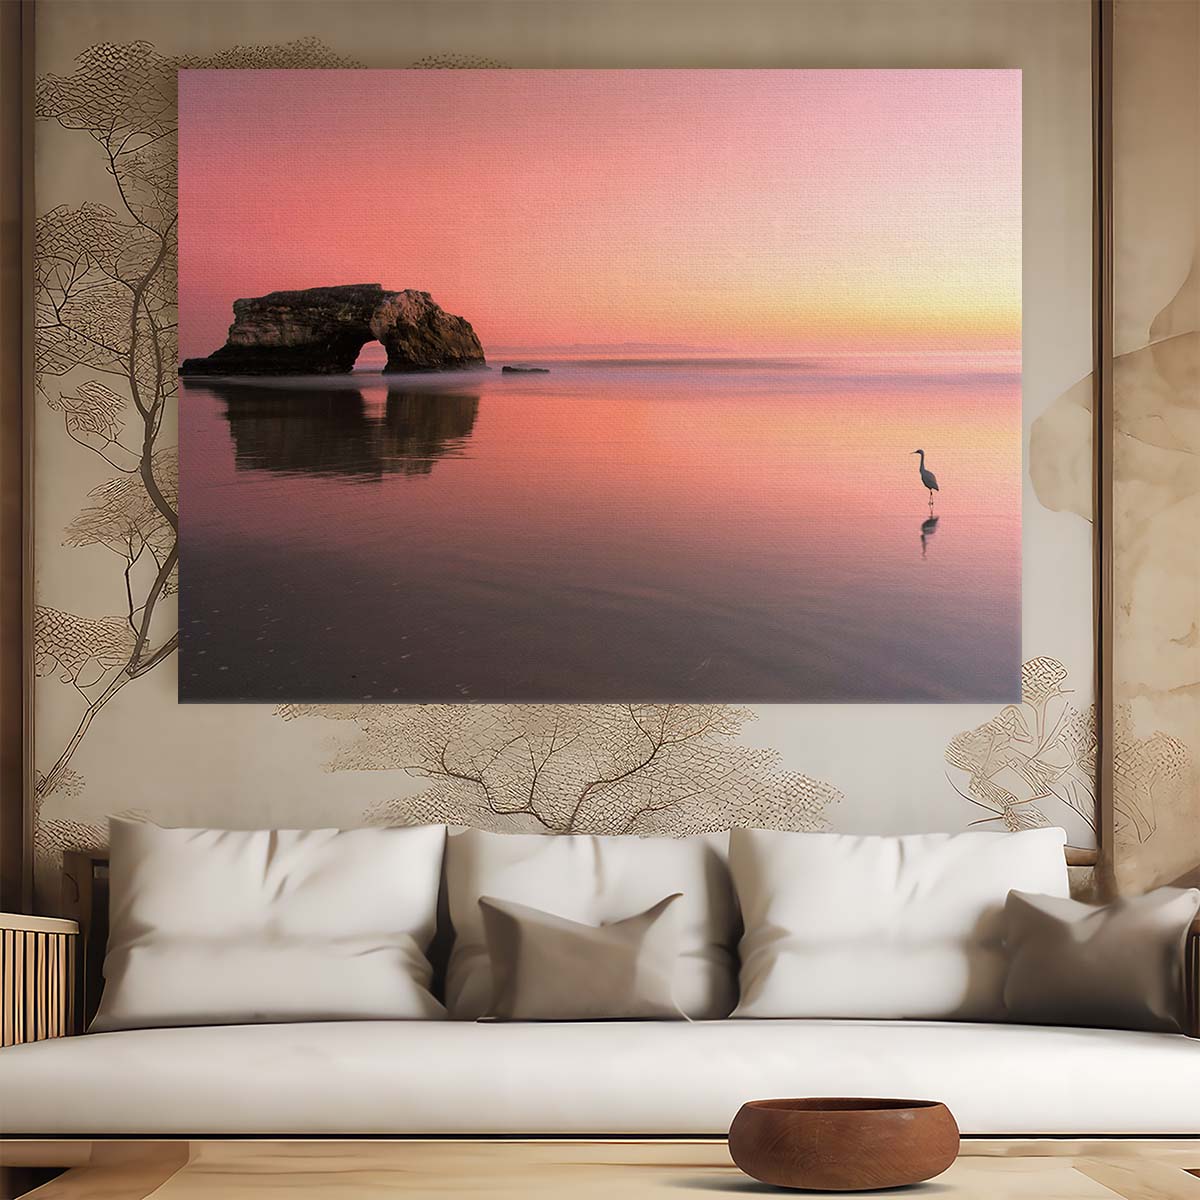 Serene Pink Sunset Seascape with Heron Wall Art by Luxuriance Designs. Made in USA.